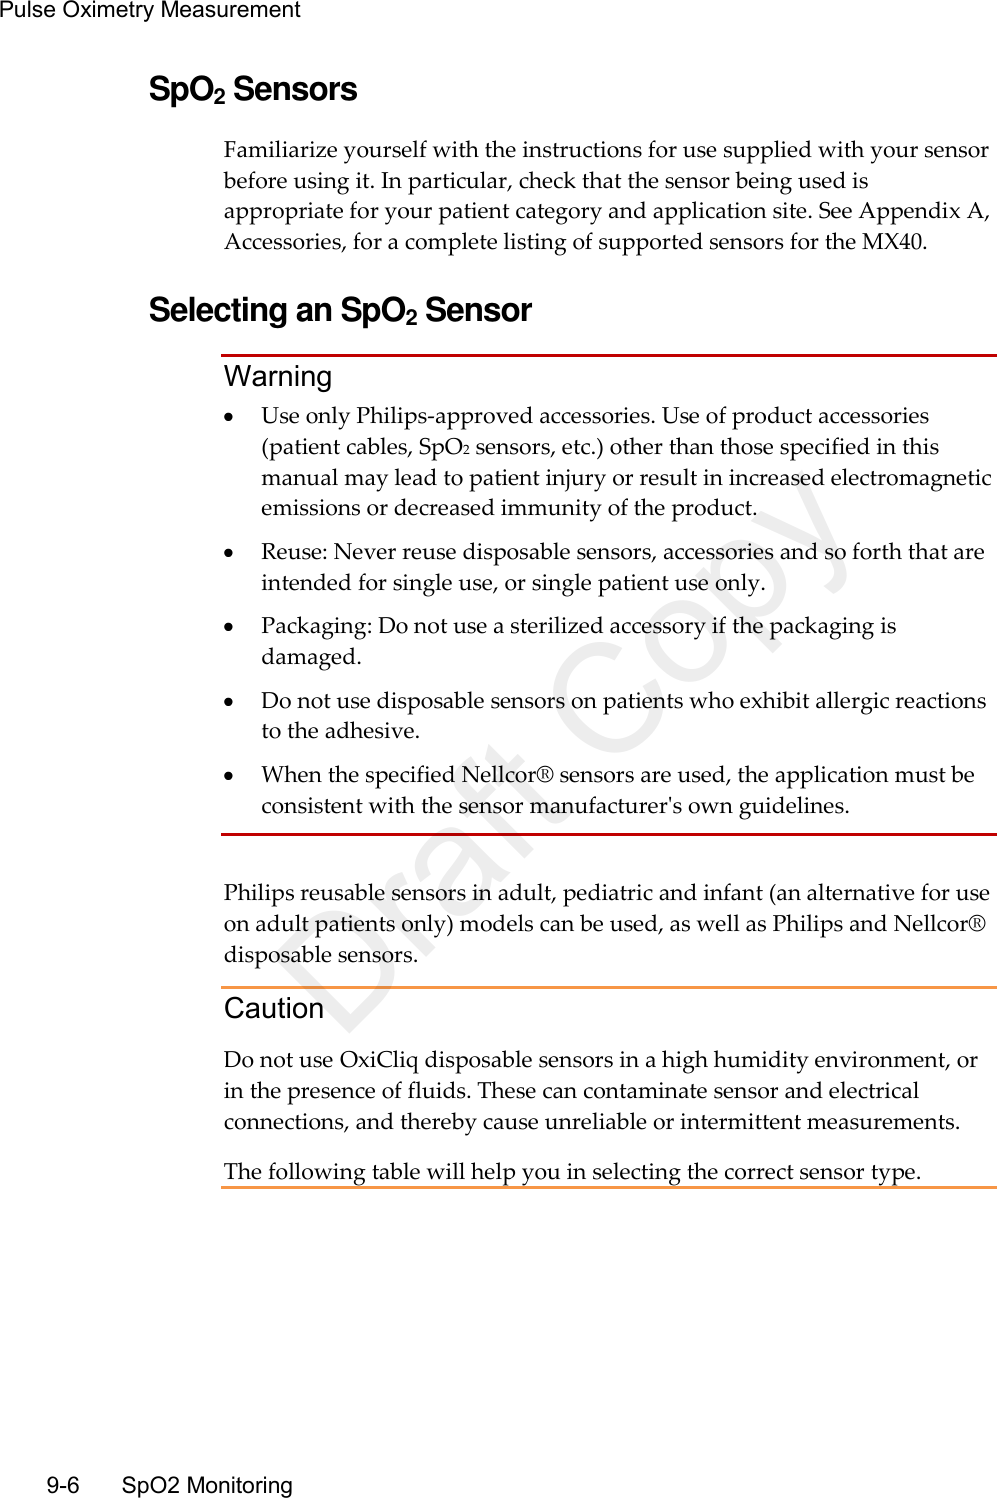 Pulse Oximetry Measurement   9-6    SpO2 Monitoring SpO2 Sensors Familiarize yourself with the instructions for use supplied with your sensor before using it. In particular, check that the sensor being used is appropriate for your patient category and application site. See Appendix A, Accessories, for a complete listing of supported sensors for the MX40.  Selecting an SpO2 Sensor Warning  Use only Philips-approved accessories. Use of product accessories (patient cables, SpO2 sensors, etc.) other than those specified in this manual may lead to patient injury or result in increased electromagnetic emissions or decreased immunity of the product.  Reuse: Never reuse disposable sensors, accessories and so forth that are intended for single use, or single patient use only.  Packaging: Do not use a sterilized accessory if the packaging is damaged.  Do not use disposable sensors on patients who exhibit allergic reactions to the adhesive.  When the specified Nellcor® sensors are used, the application must be consistent with the sensor manufacturer&apos;s own guidelines.  Philips reusable sensors in adult, pediatric and infant (an alternative for use on adult patients only) models can be used, as well as Philips and Nellcor® disposable sensors. Caution Do not use OxiCliq disposable sensors in a high humidity environment, or in the presence of fluids. These can contaminate sensor and electrical connections, and thereby cause unreliable or intermittent measurements. The following table will help you in selecting the correct sensor type.  Draft Copy